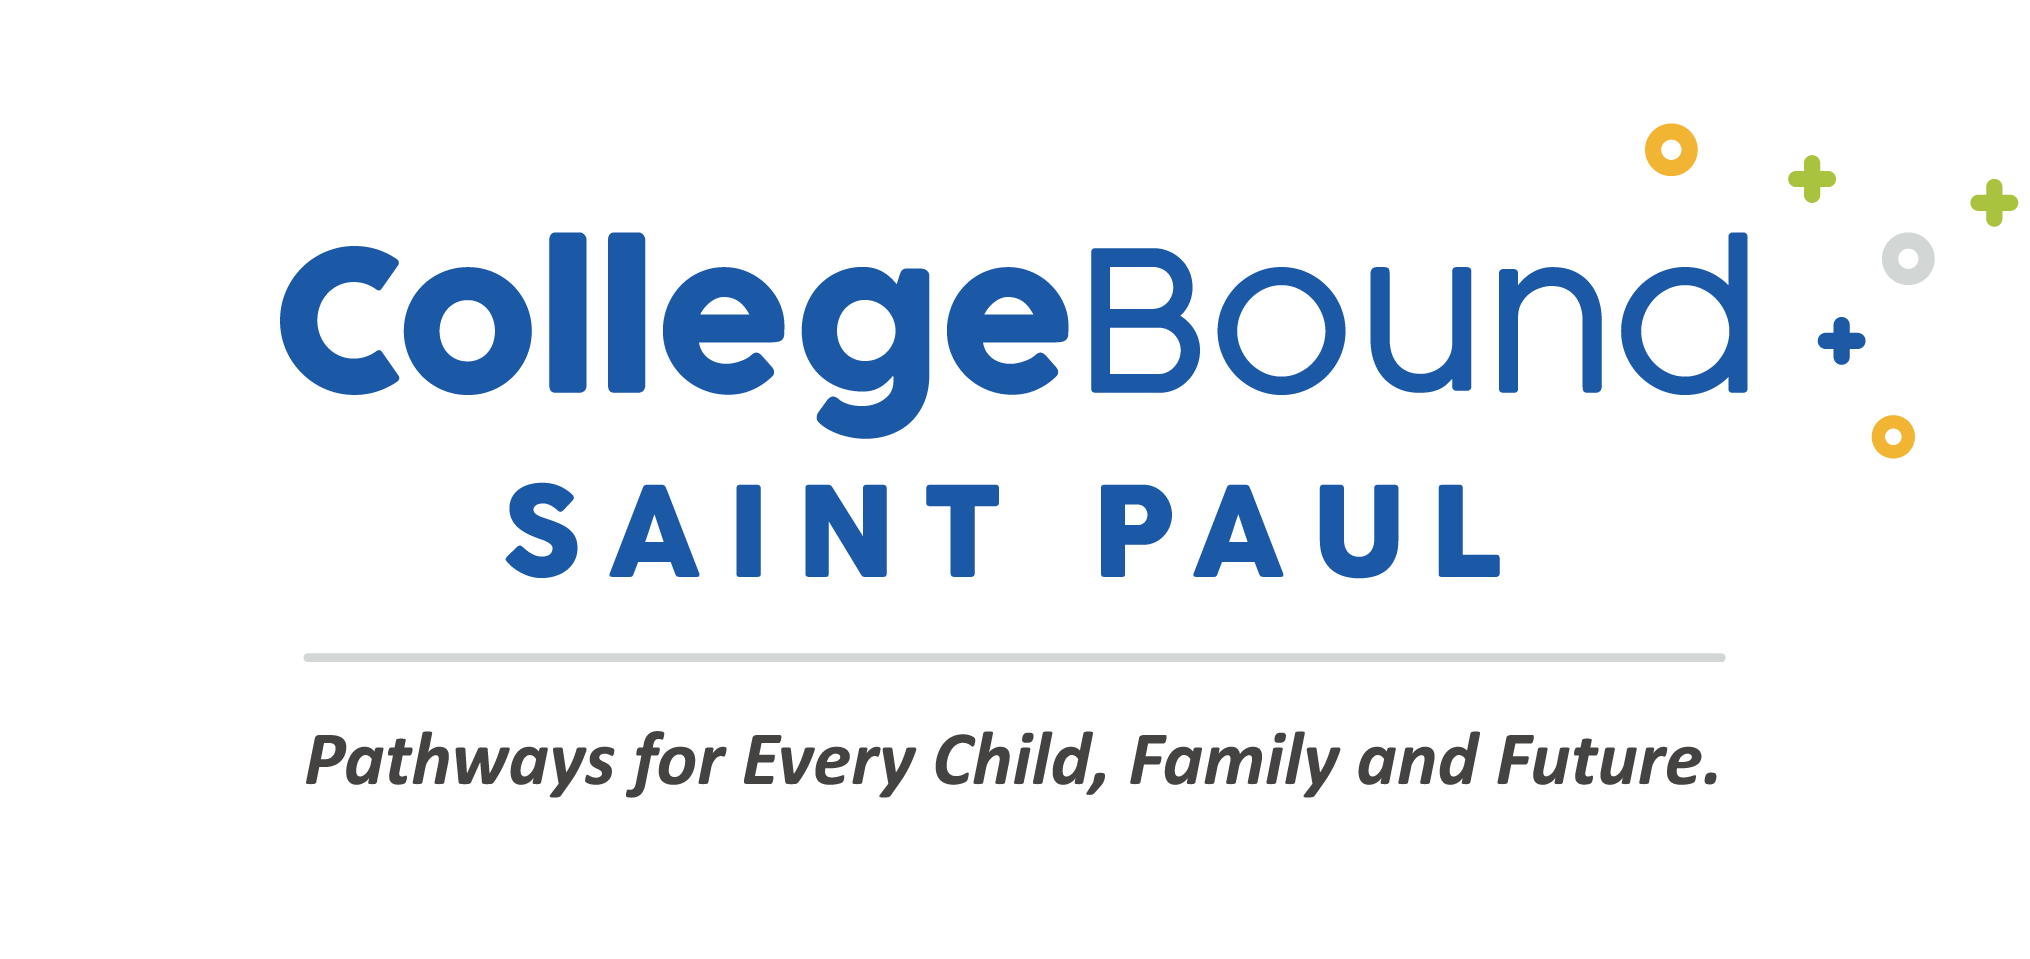 CollegeBound Saint Paul. Pathways for every child, family, and future.